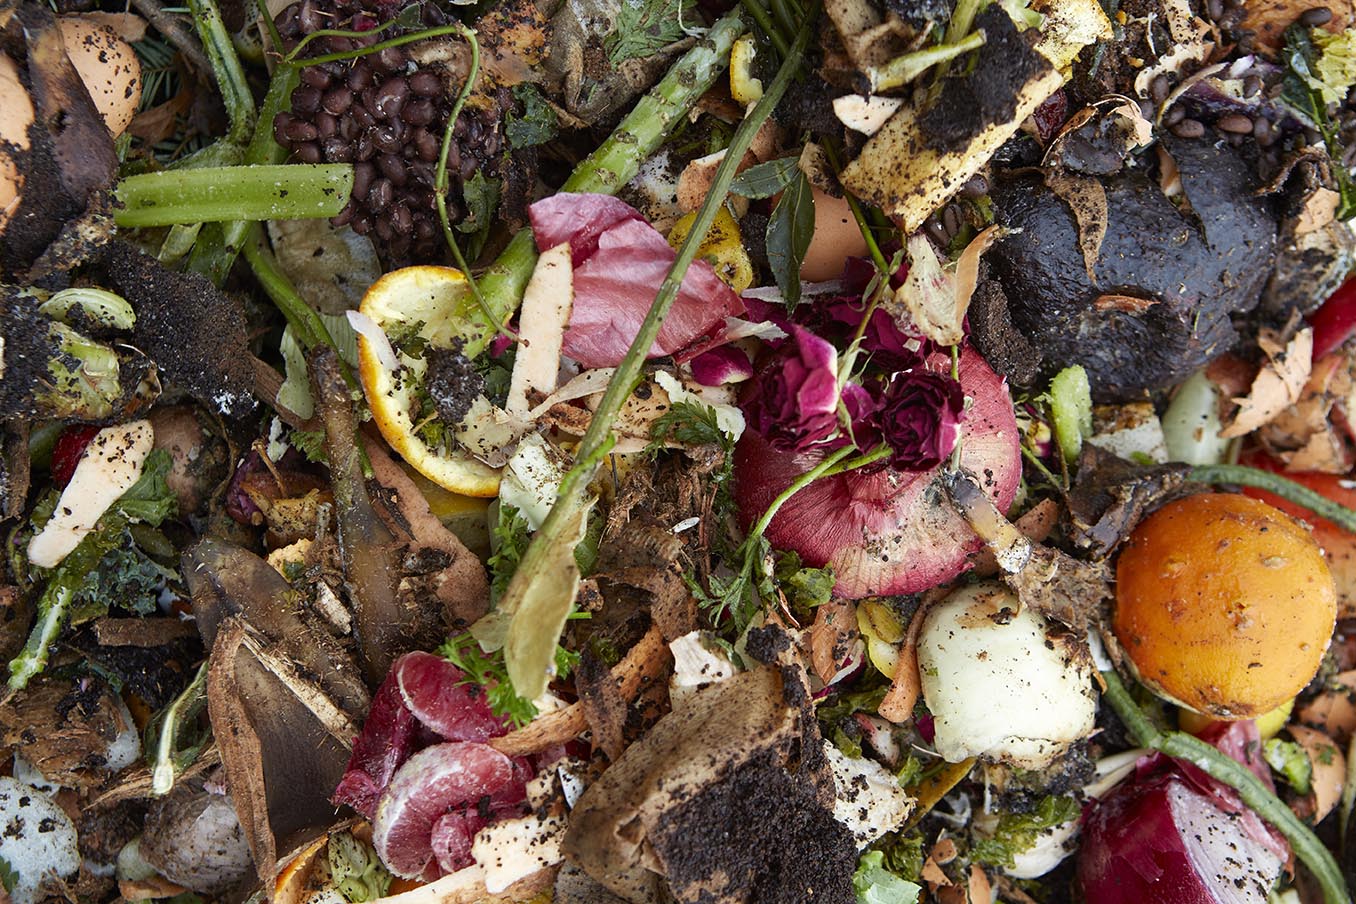 Learn how to compost in Queens.